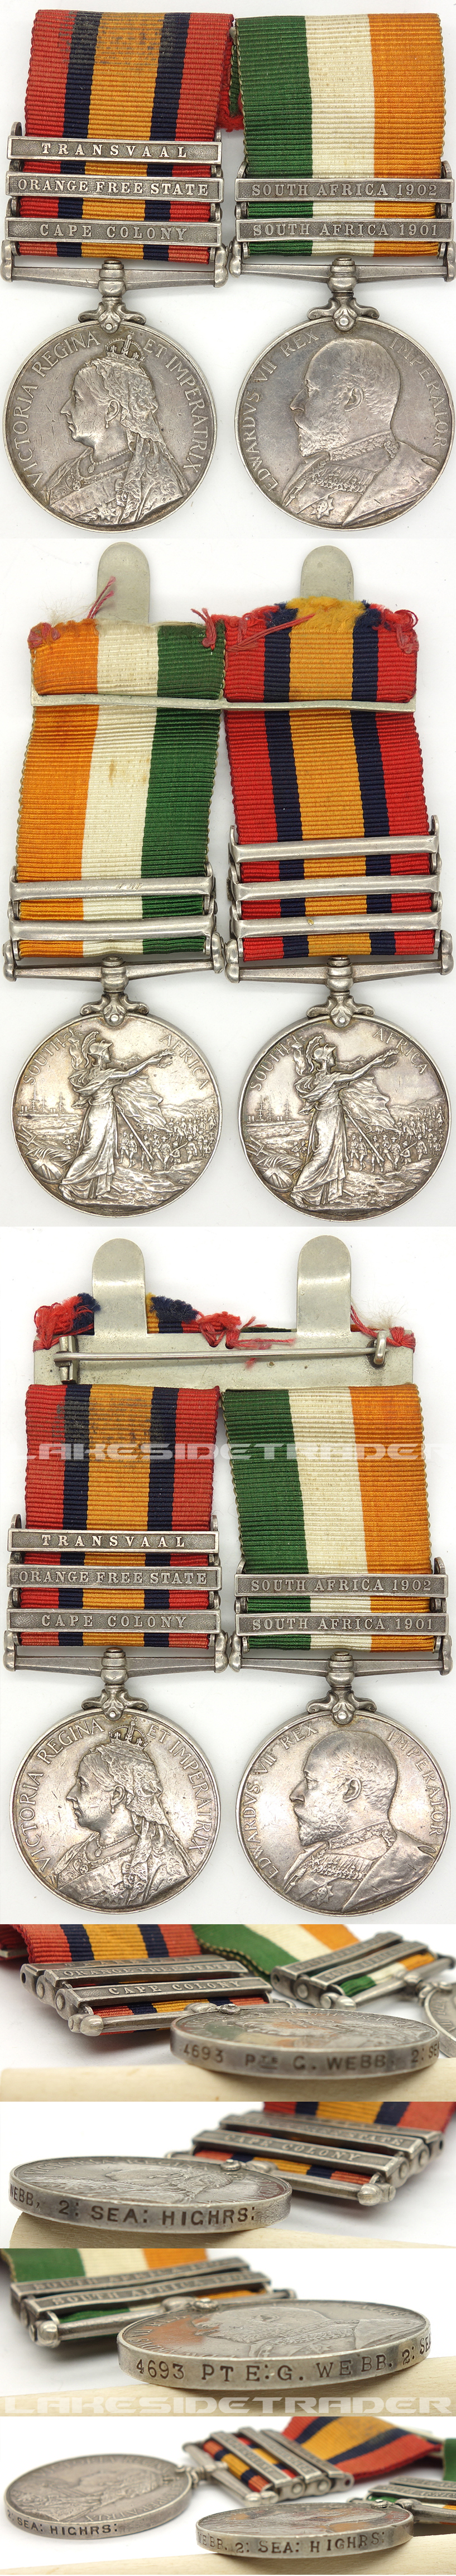 Queen's and King's South Africa Medal Bar w partial research